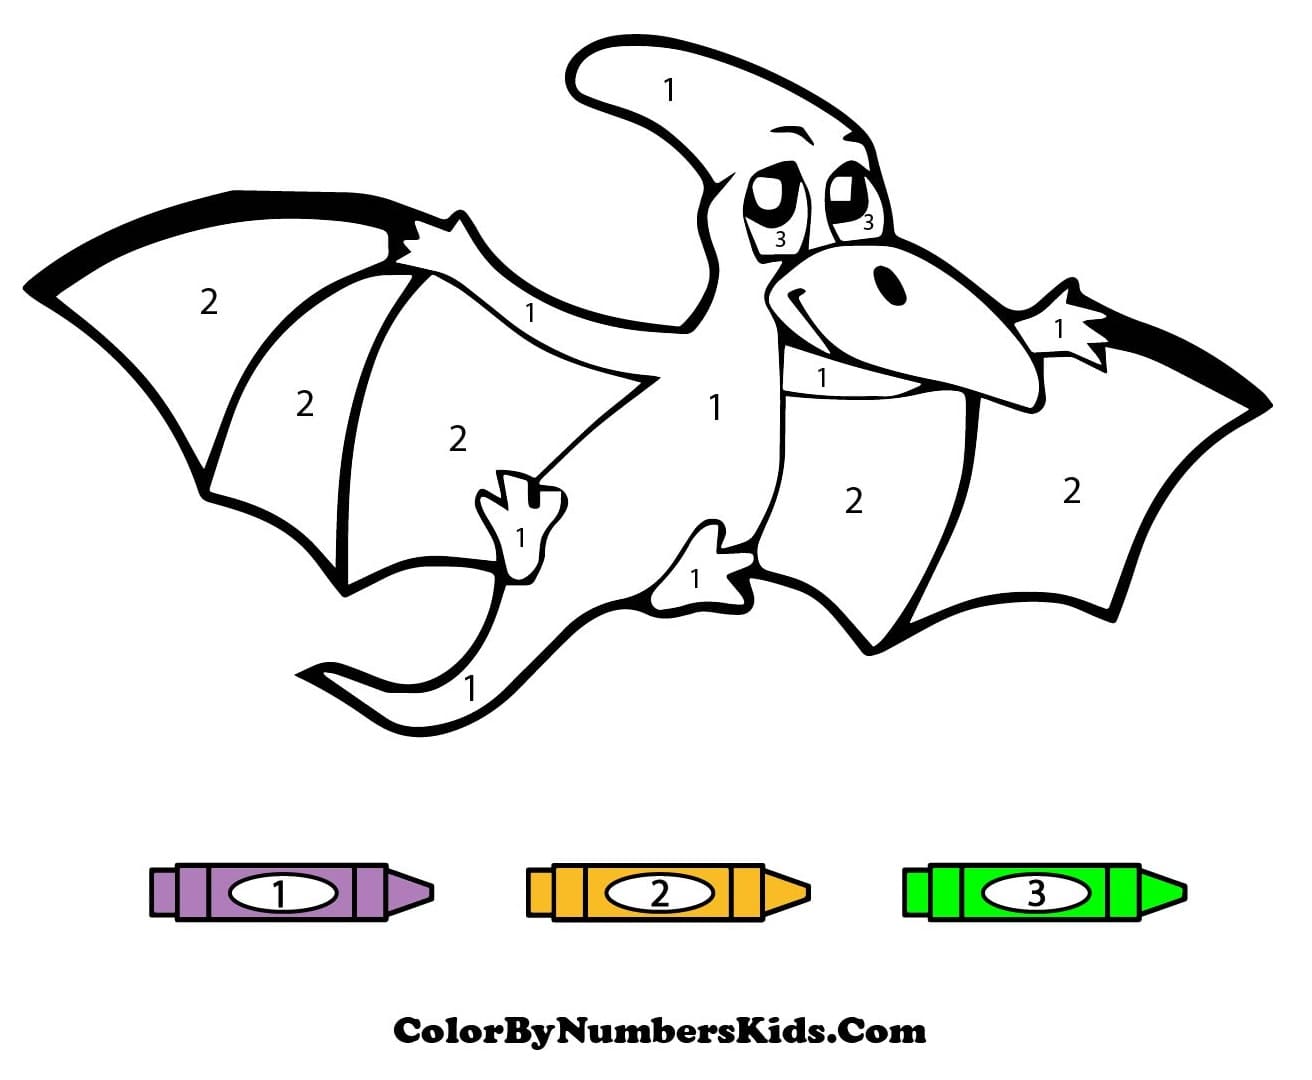 Cartoon Pterodactyl Dinosaur Color By Number